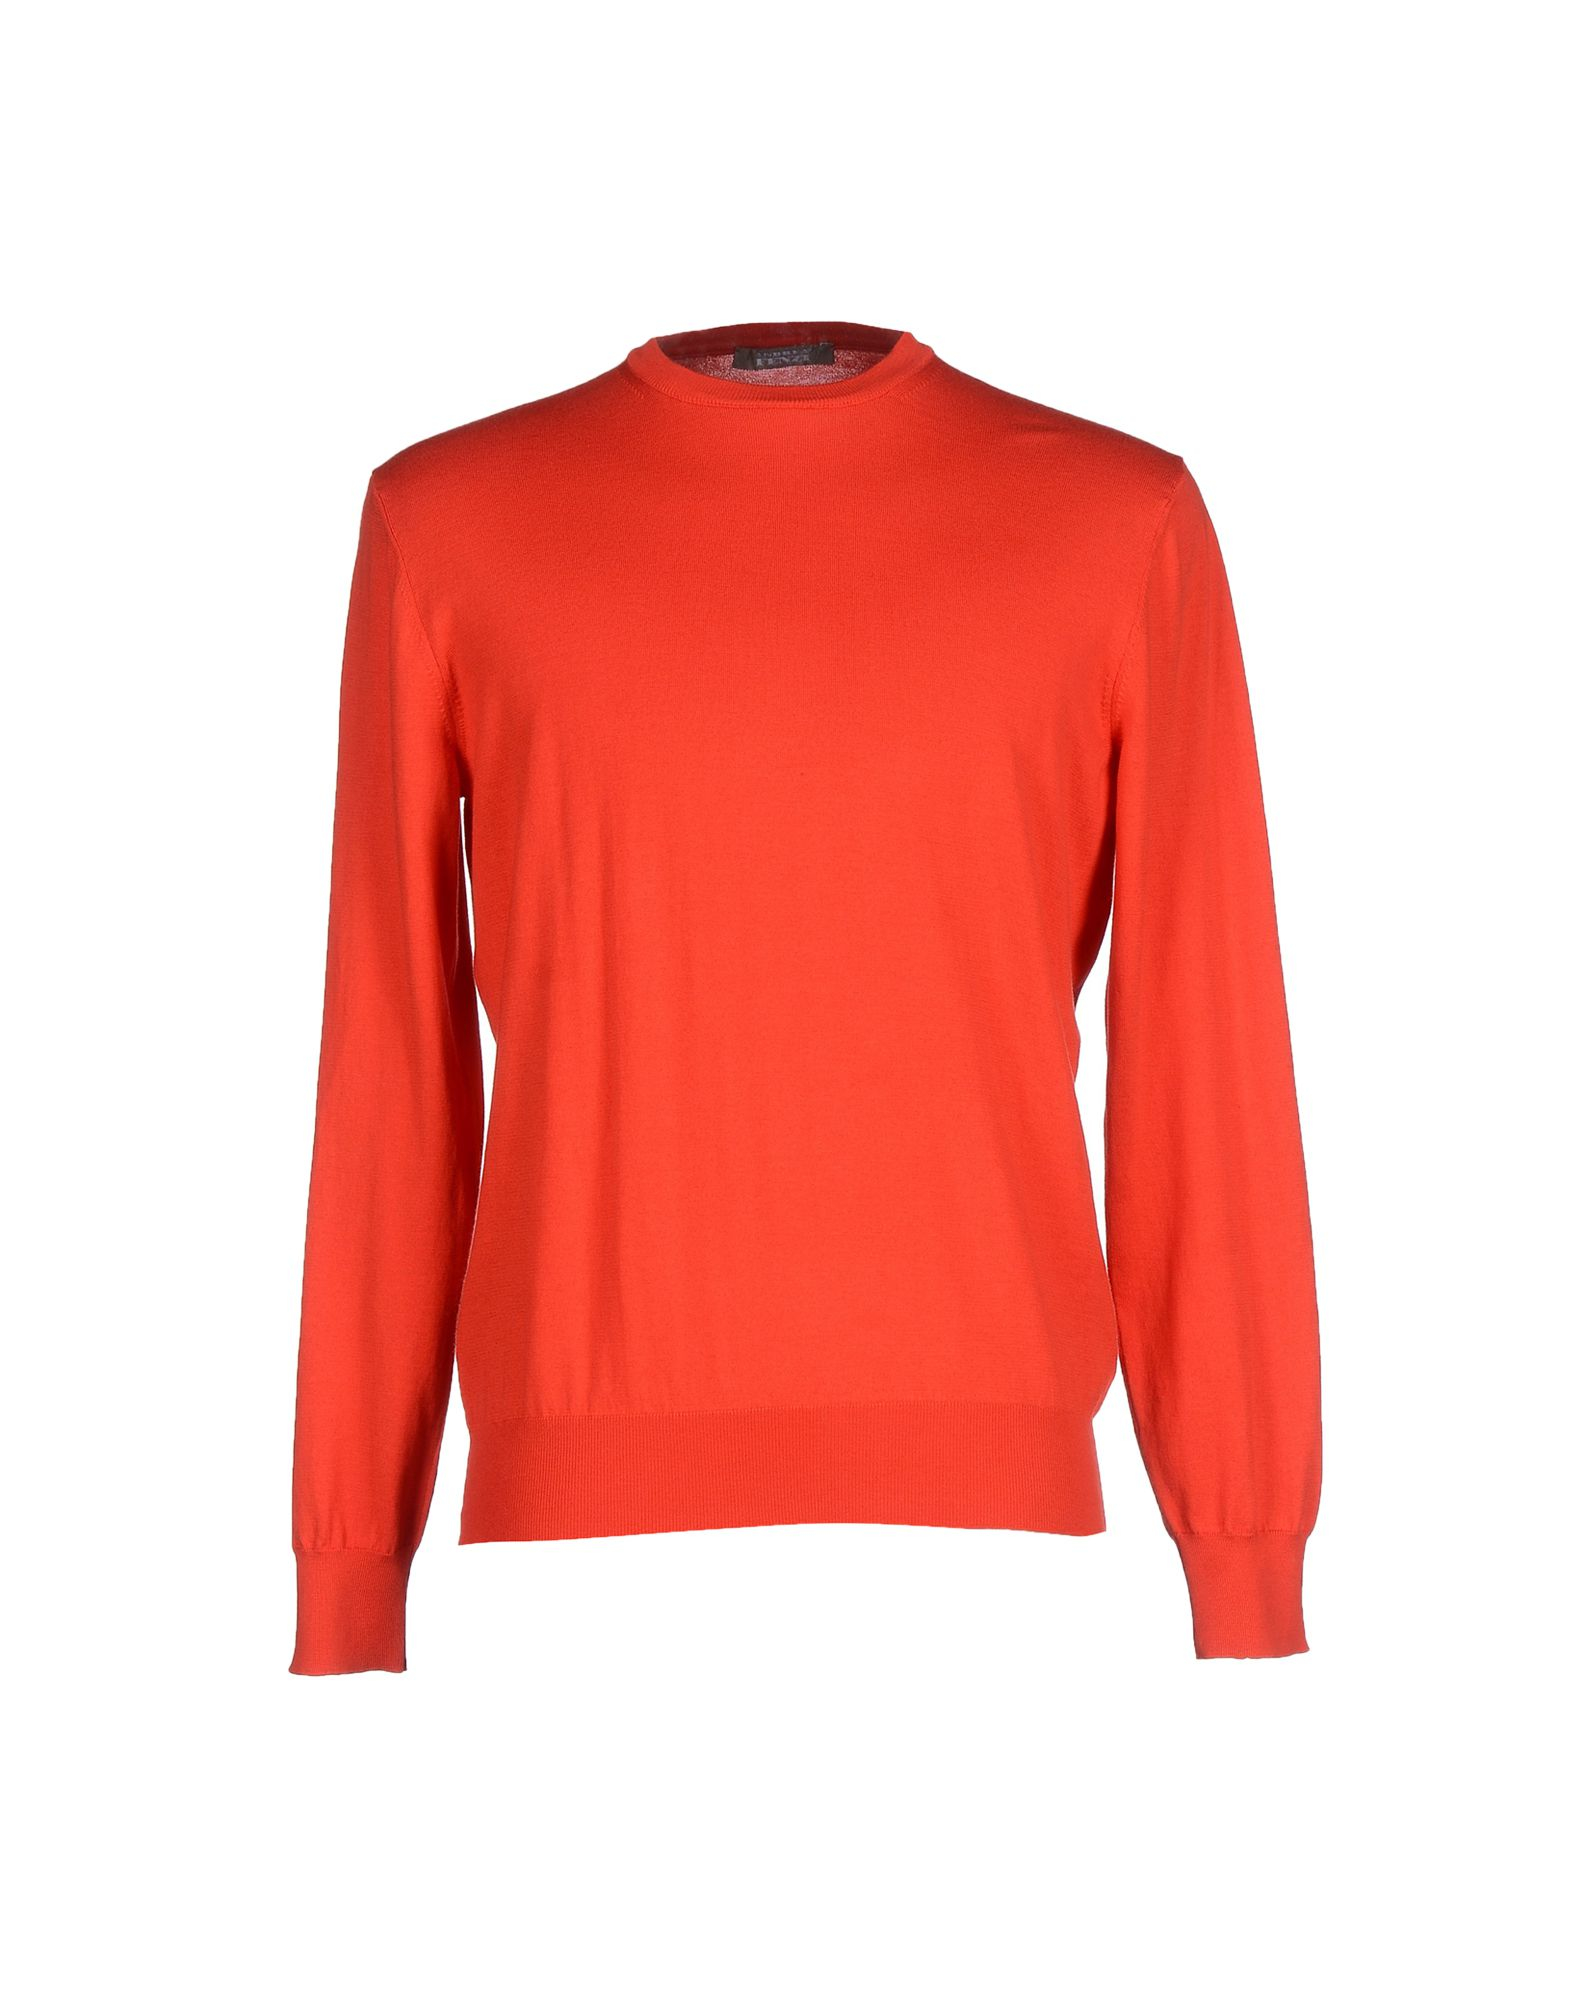 Andrea fenzi Jumper in Red for Men - Save 72% | Lyst